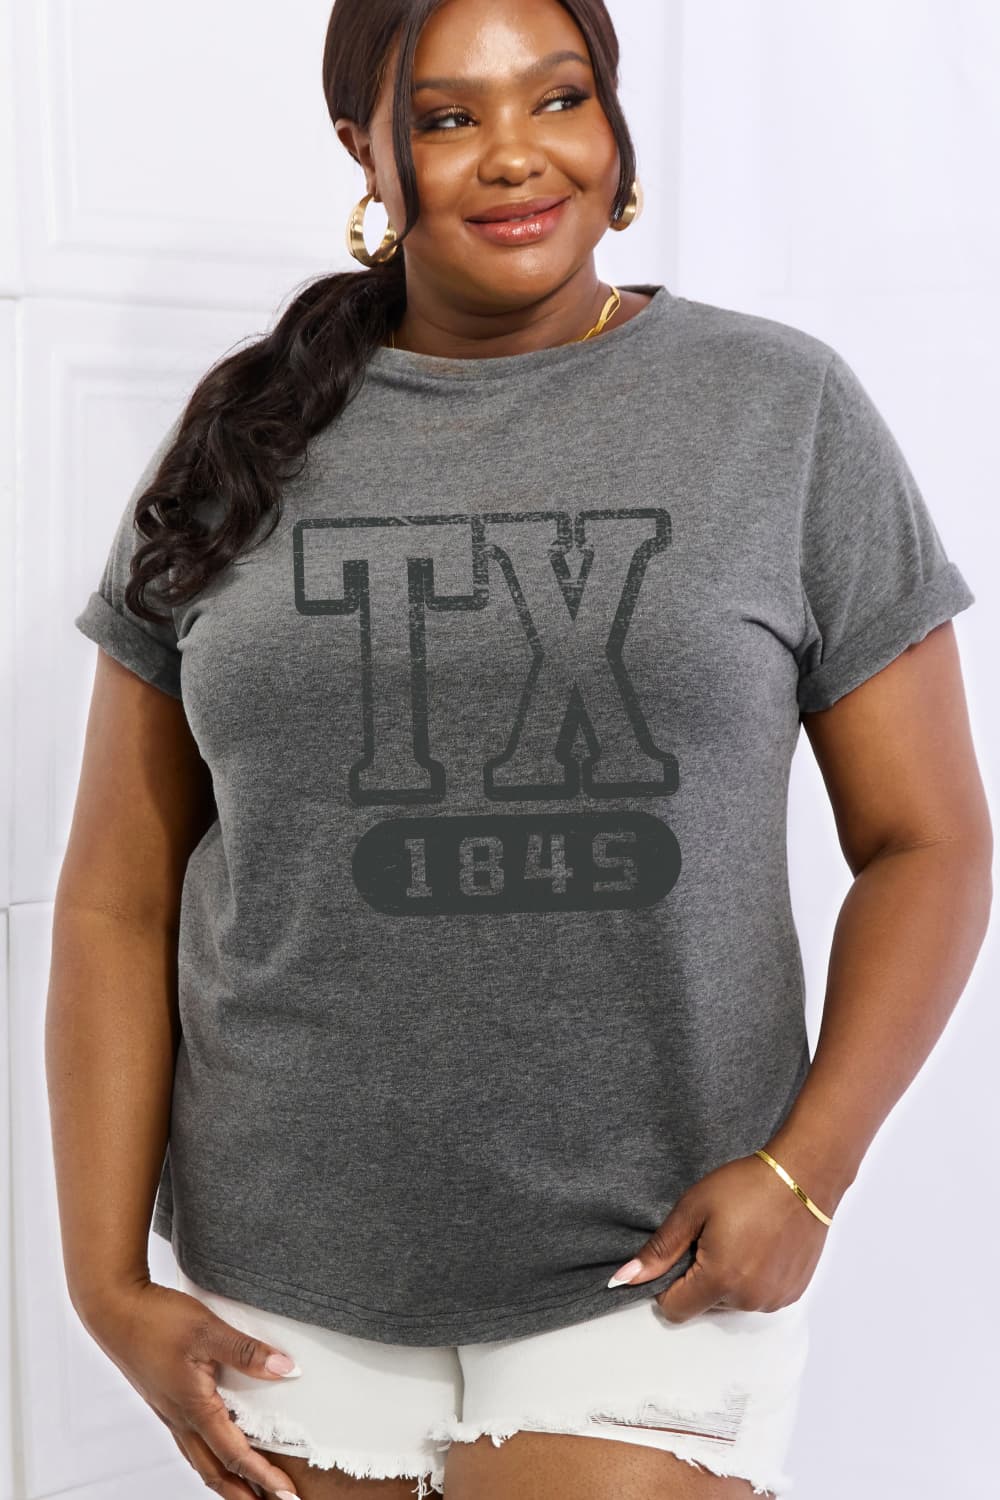 TX 1845 Graphic  Tee